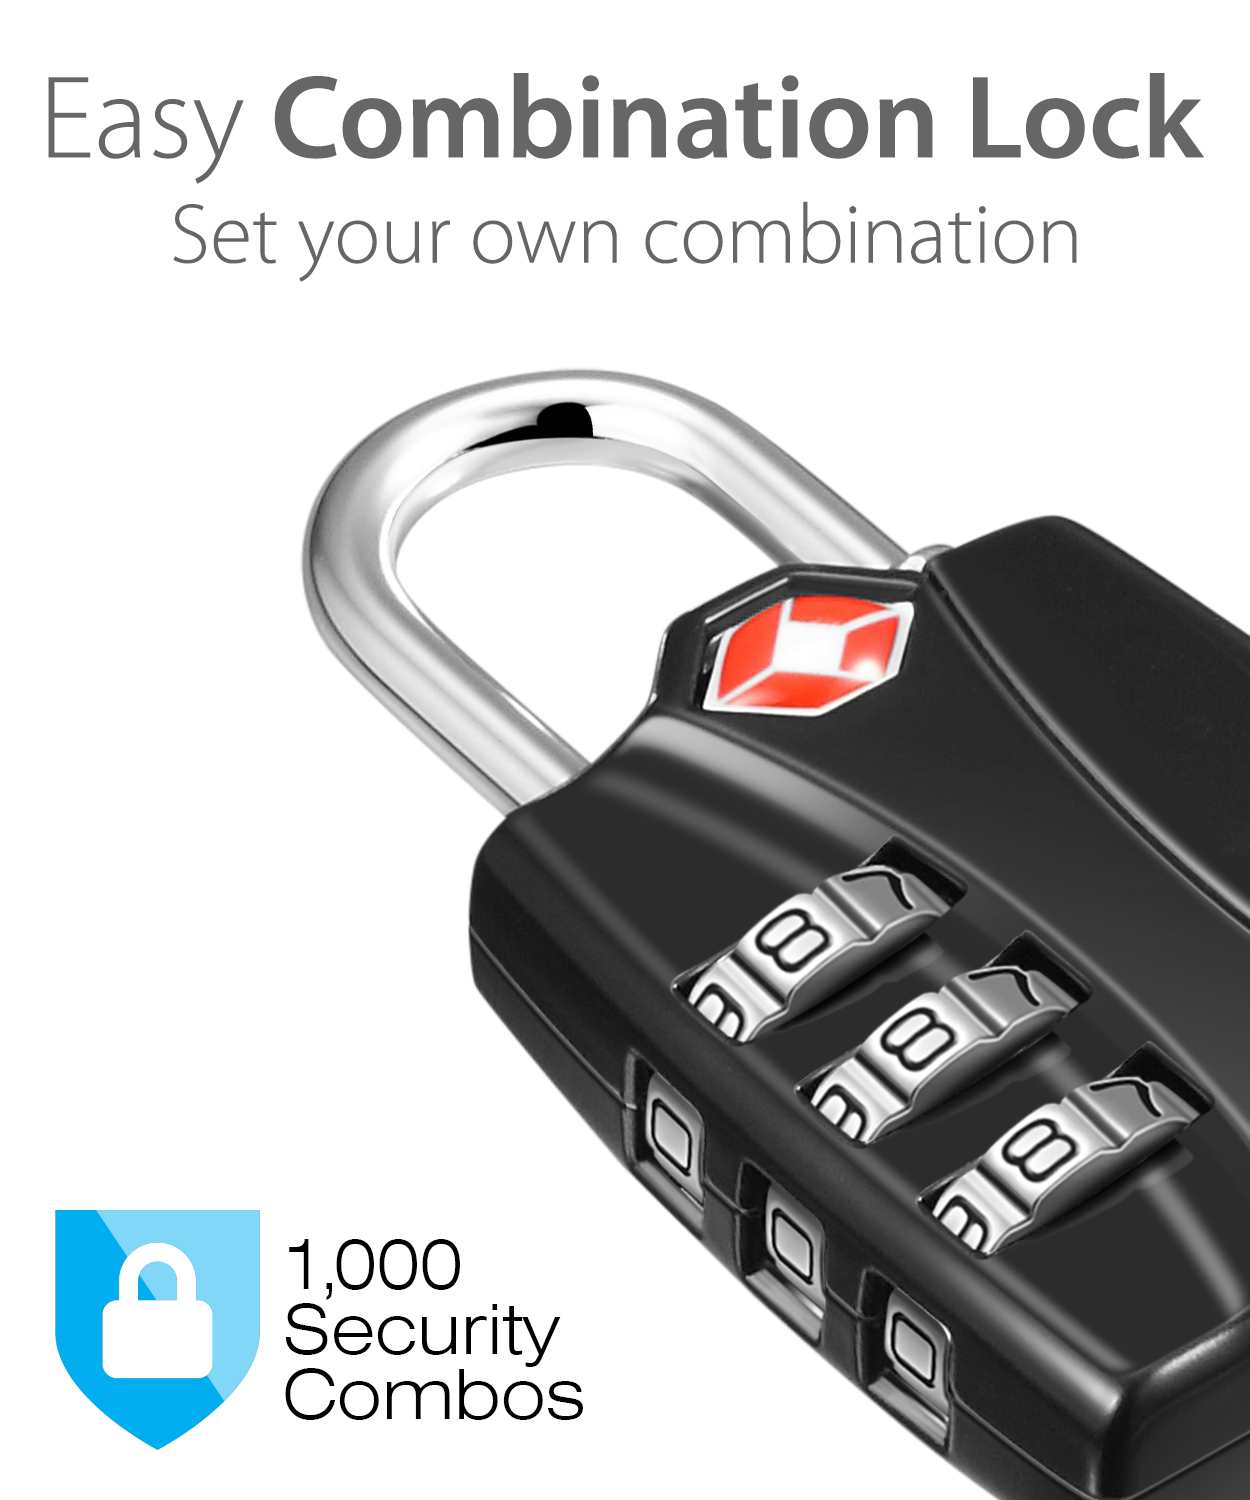 Fosmon TSA Accepted Luggage Locks, (3 Pack) Open Alert Indicator 3 Digit Combination Padlock Codes with Alloy Body for Travel Bag, Suit Case, Lockers, Gym, Bike Locks or Other - image 4 of 8